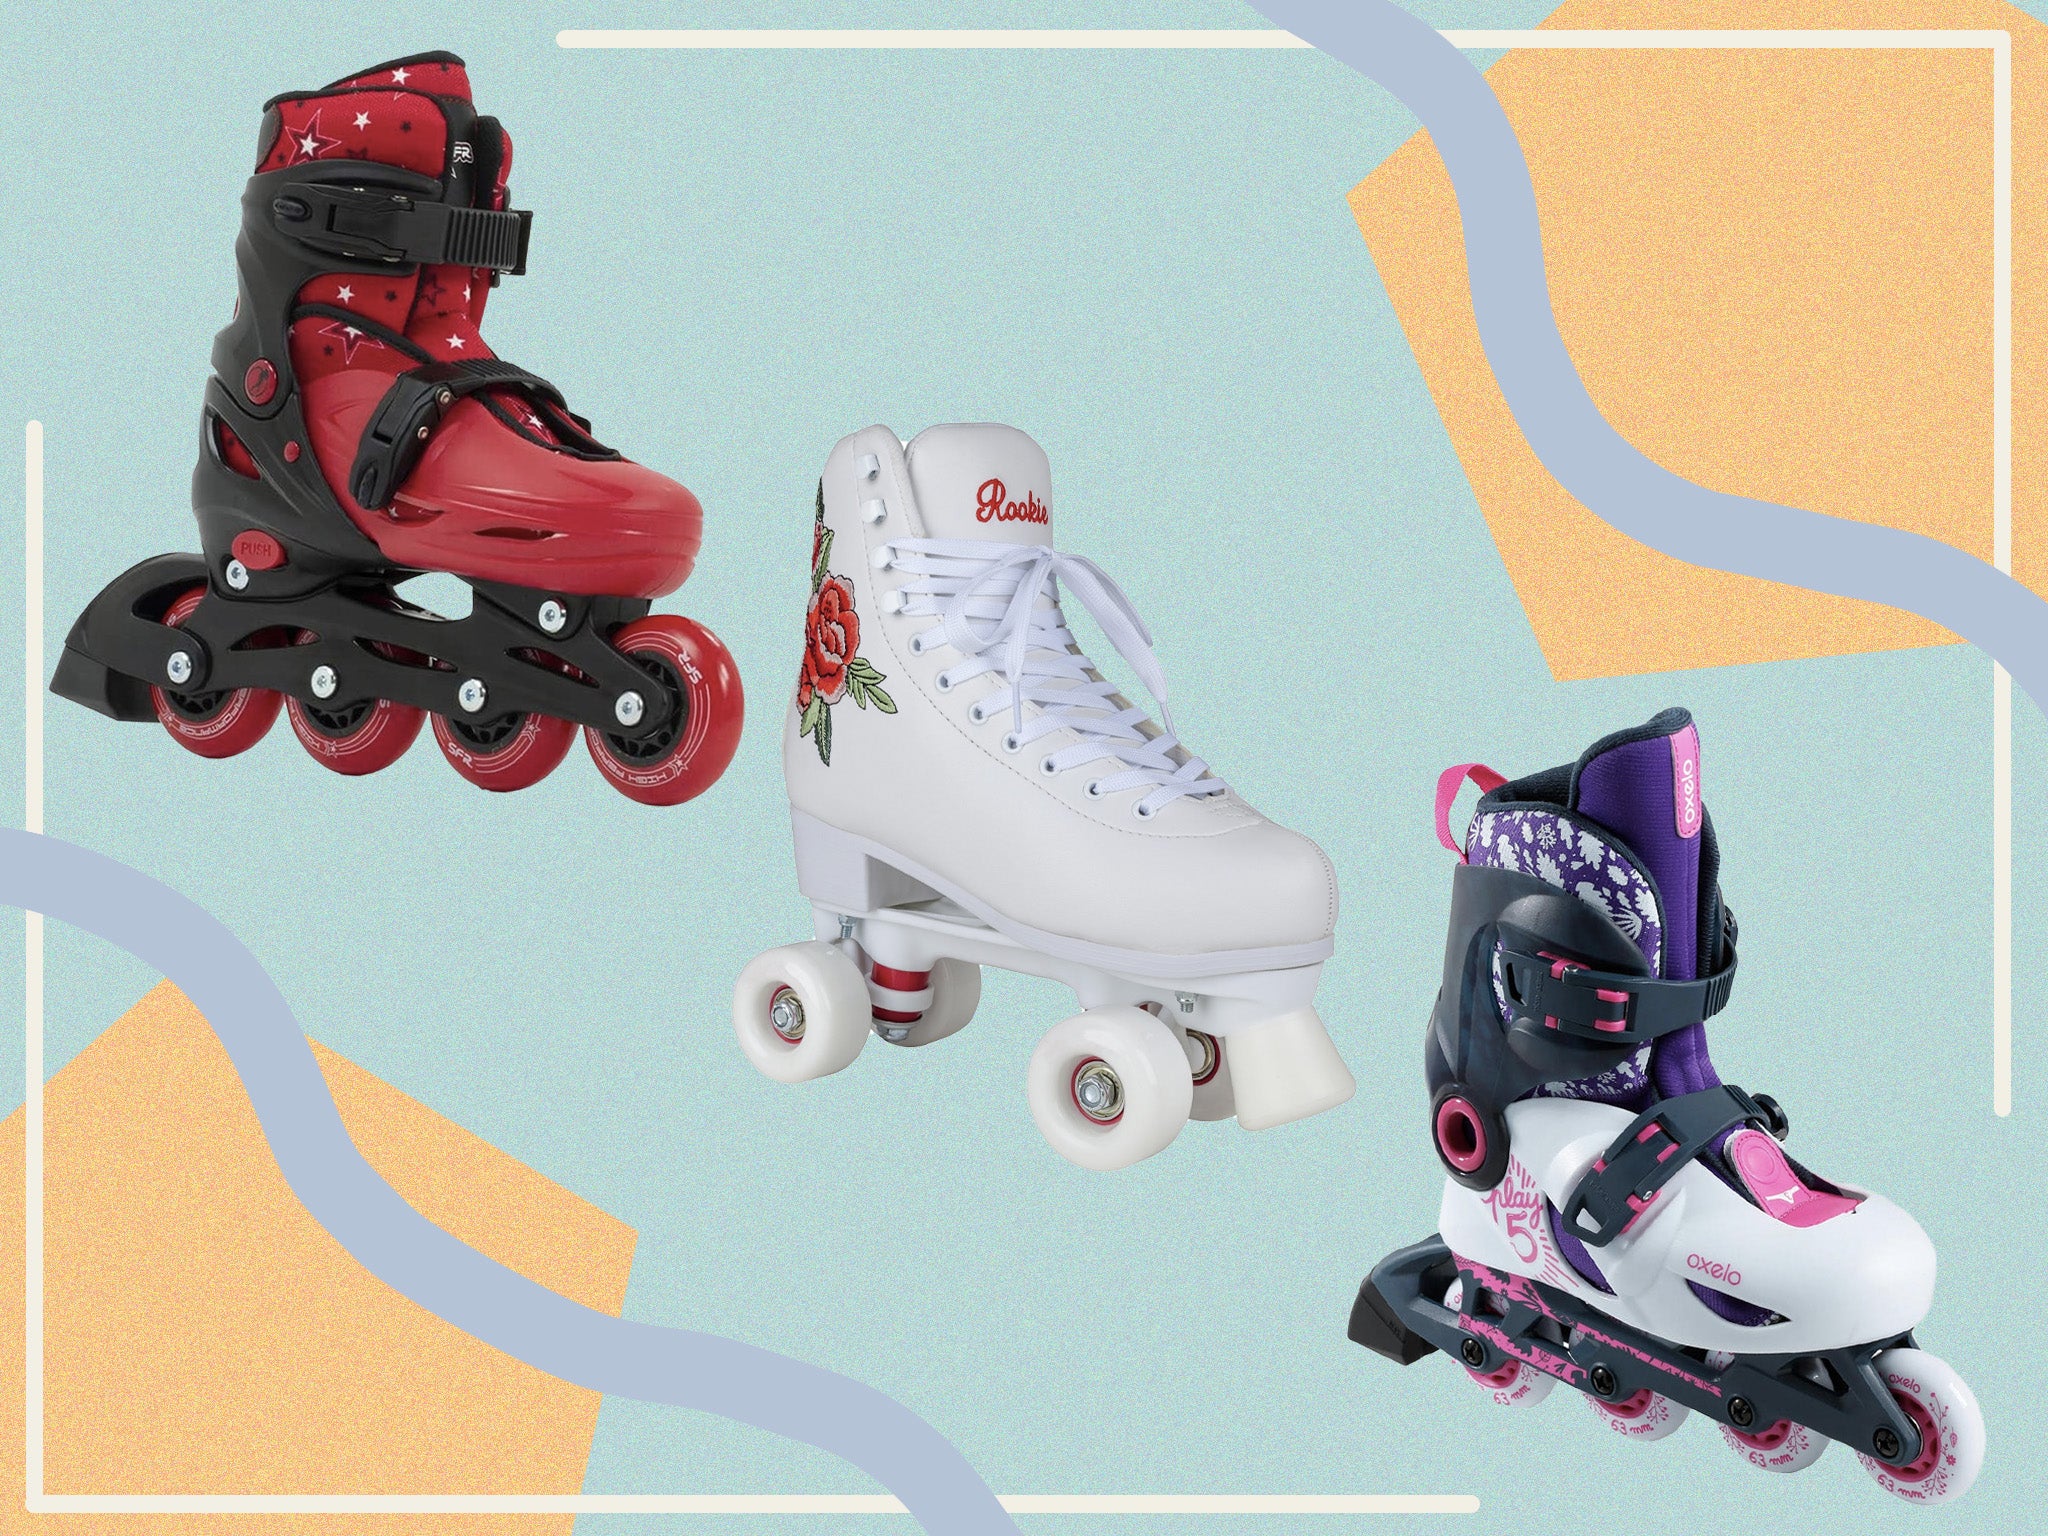 Color:Blue A,Size:M/US3.5-5.5/21-22. 2 in 1 Dual Use Roller Skates for Men and Women,Youth Children’s Indoor&Outdoor Ice Ska Kids Adjustable Inline Skates,Ice/Hockey Skate Weights for Girls/Boys 